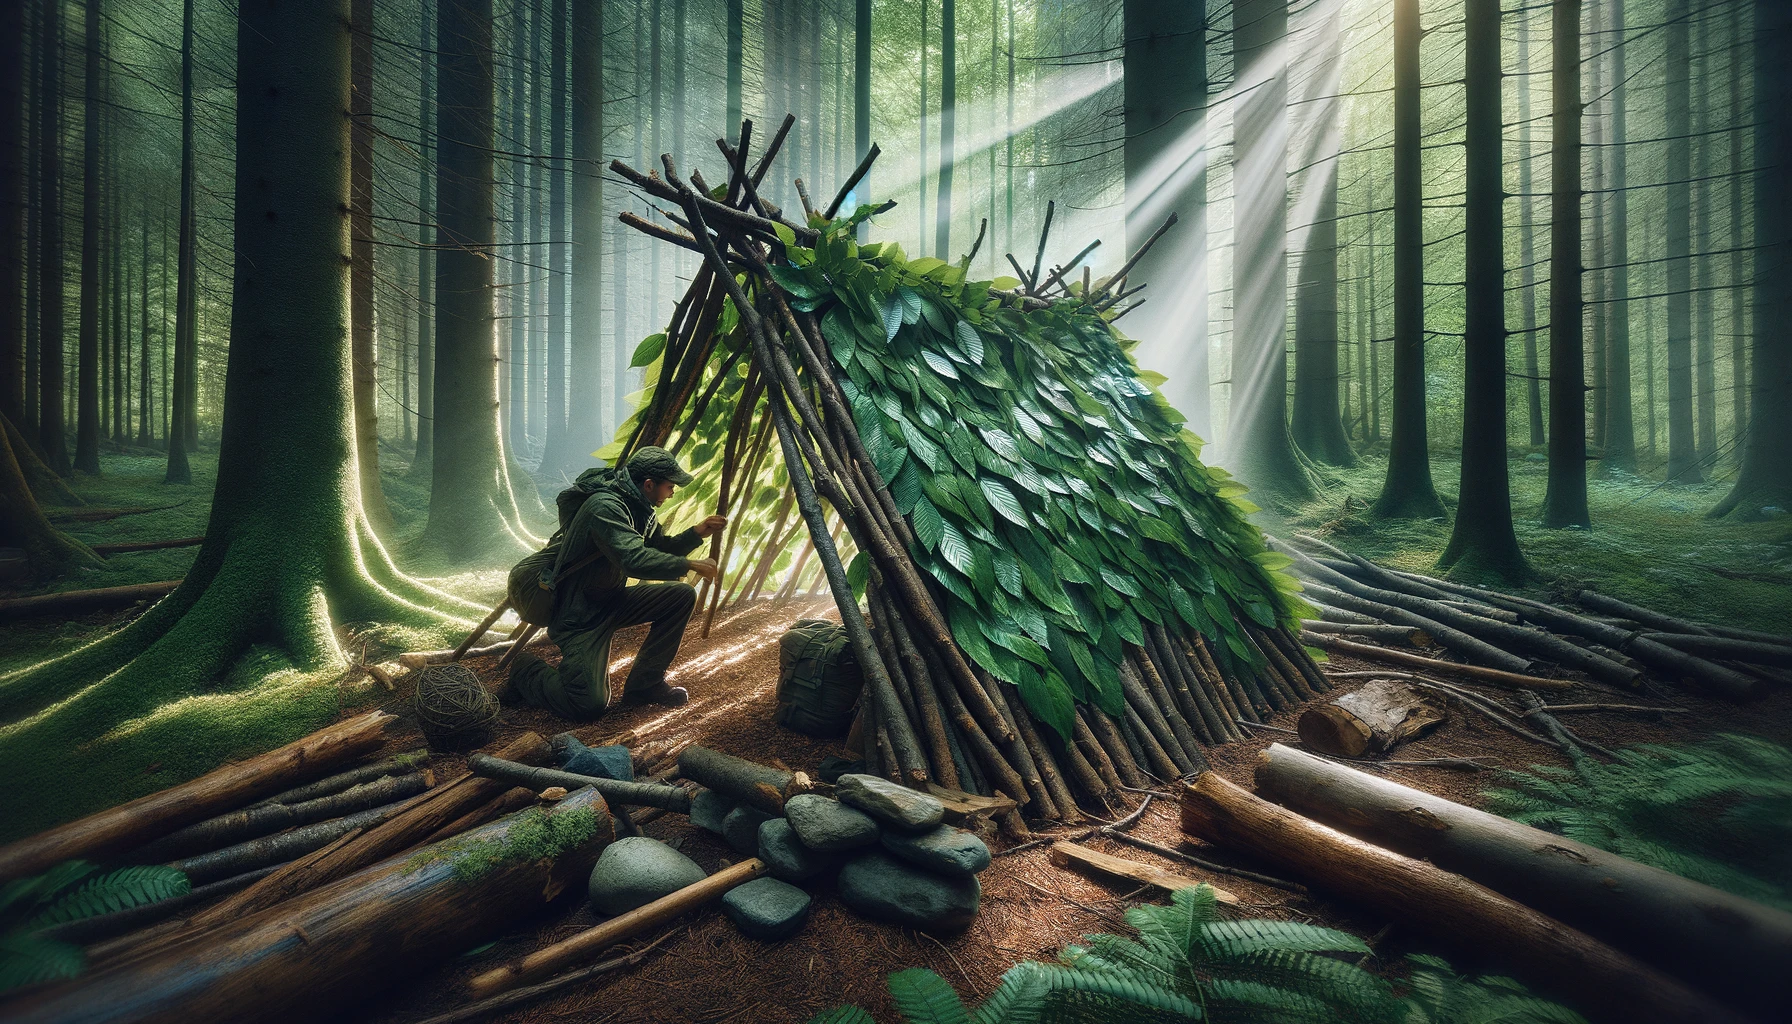 Instructive scene of building an effective bushcraft shelter in the forest, showing a person constructing a lean-to with branches and leaves for insulation, surrounded by handmade tools, under a canopy with rays of light, emphasizing survival skills and ingenuity in wilderness shelter creation